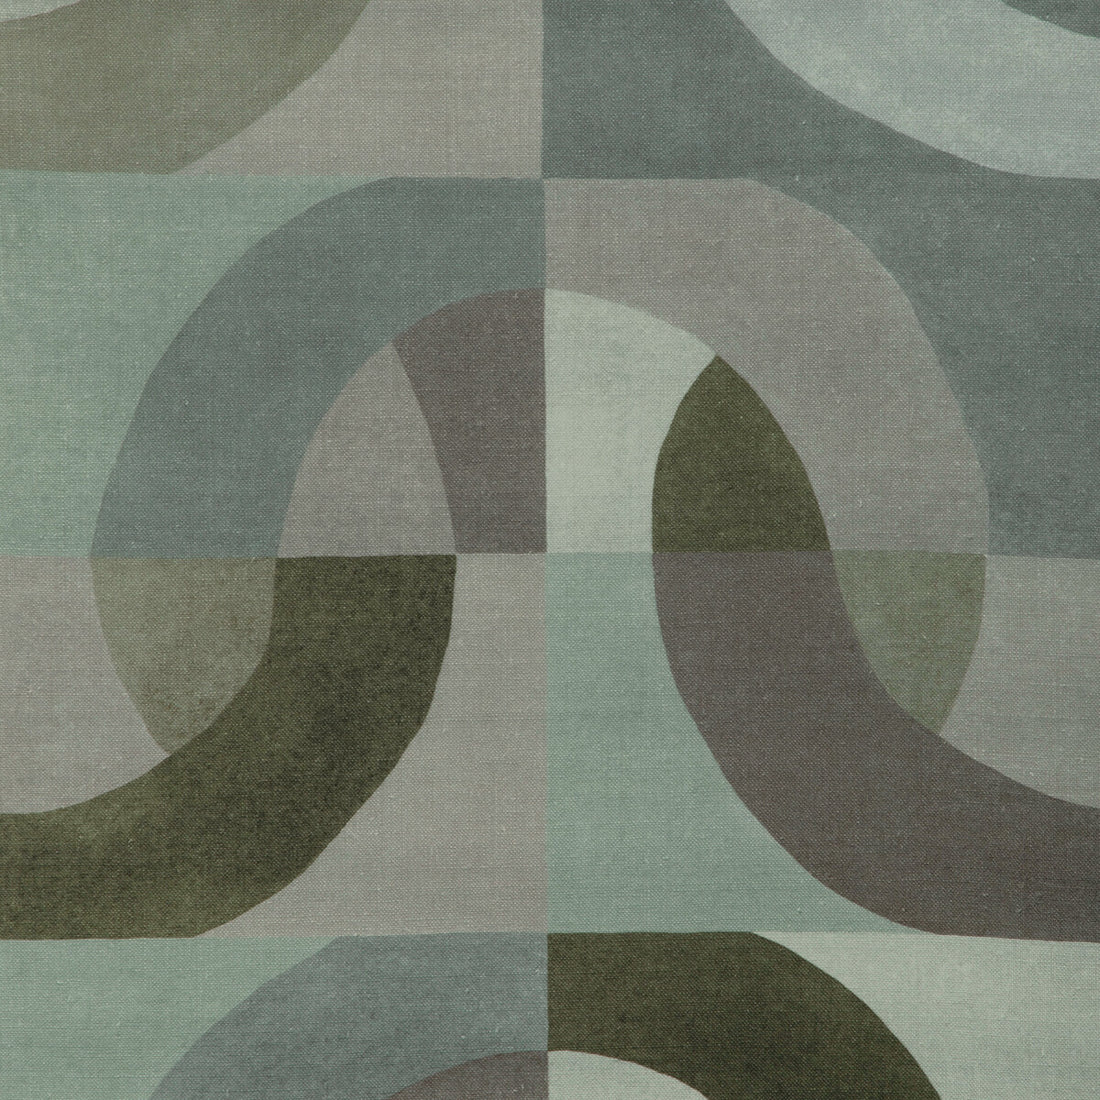 Colonnade fabric in jadestone color - pattern GWF-3788.1311.0 - by Lee Jofa Modern in the Kelly Wearstler VII collection